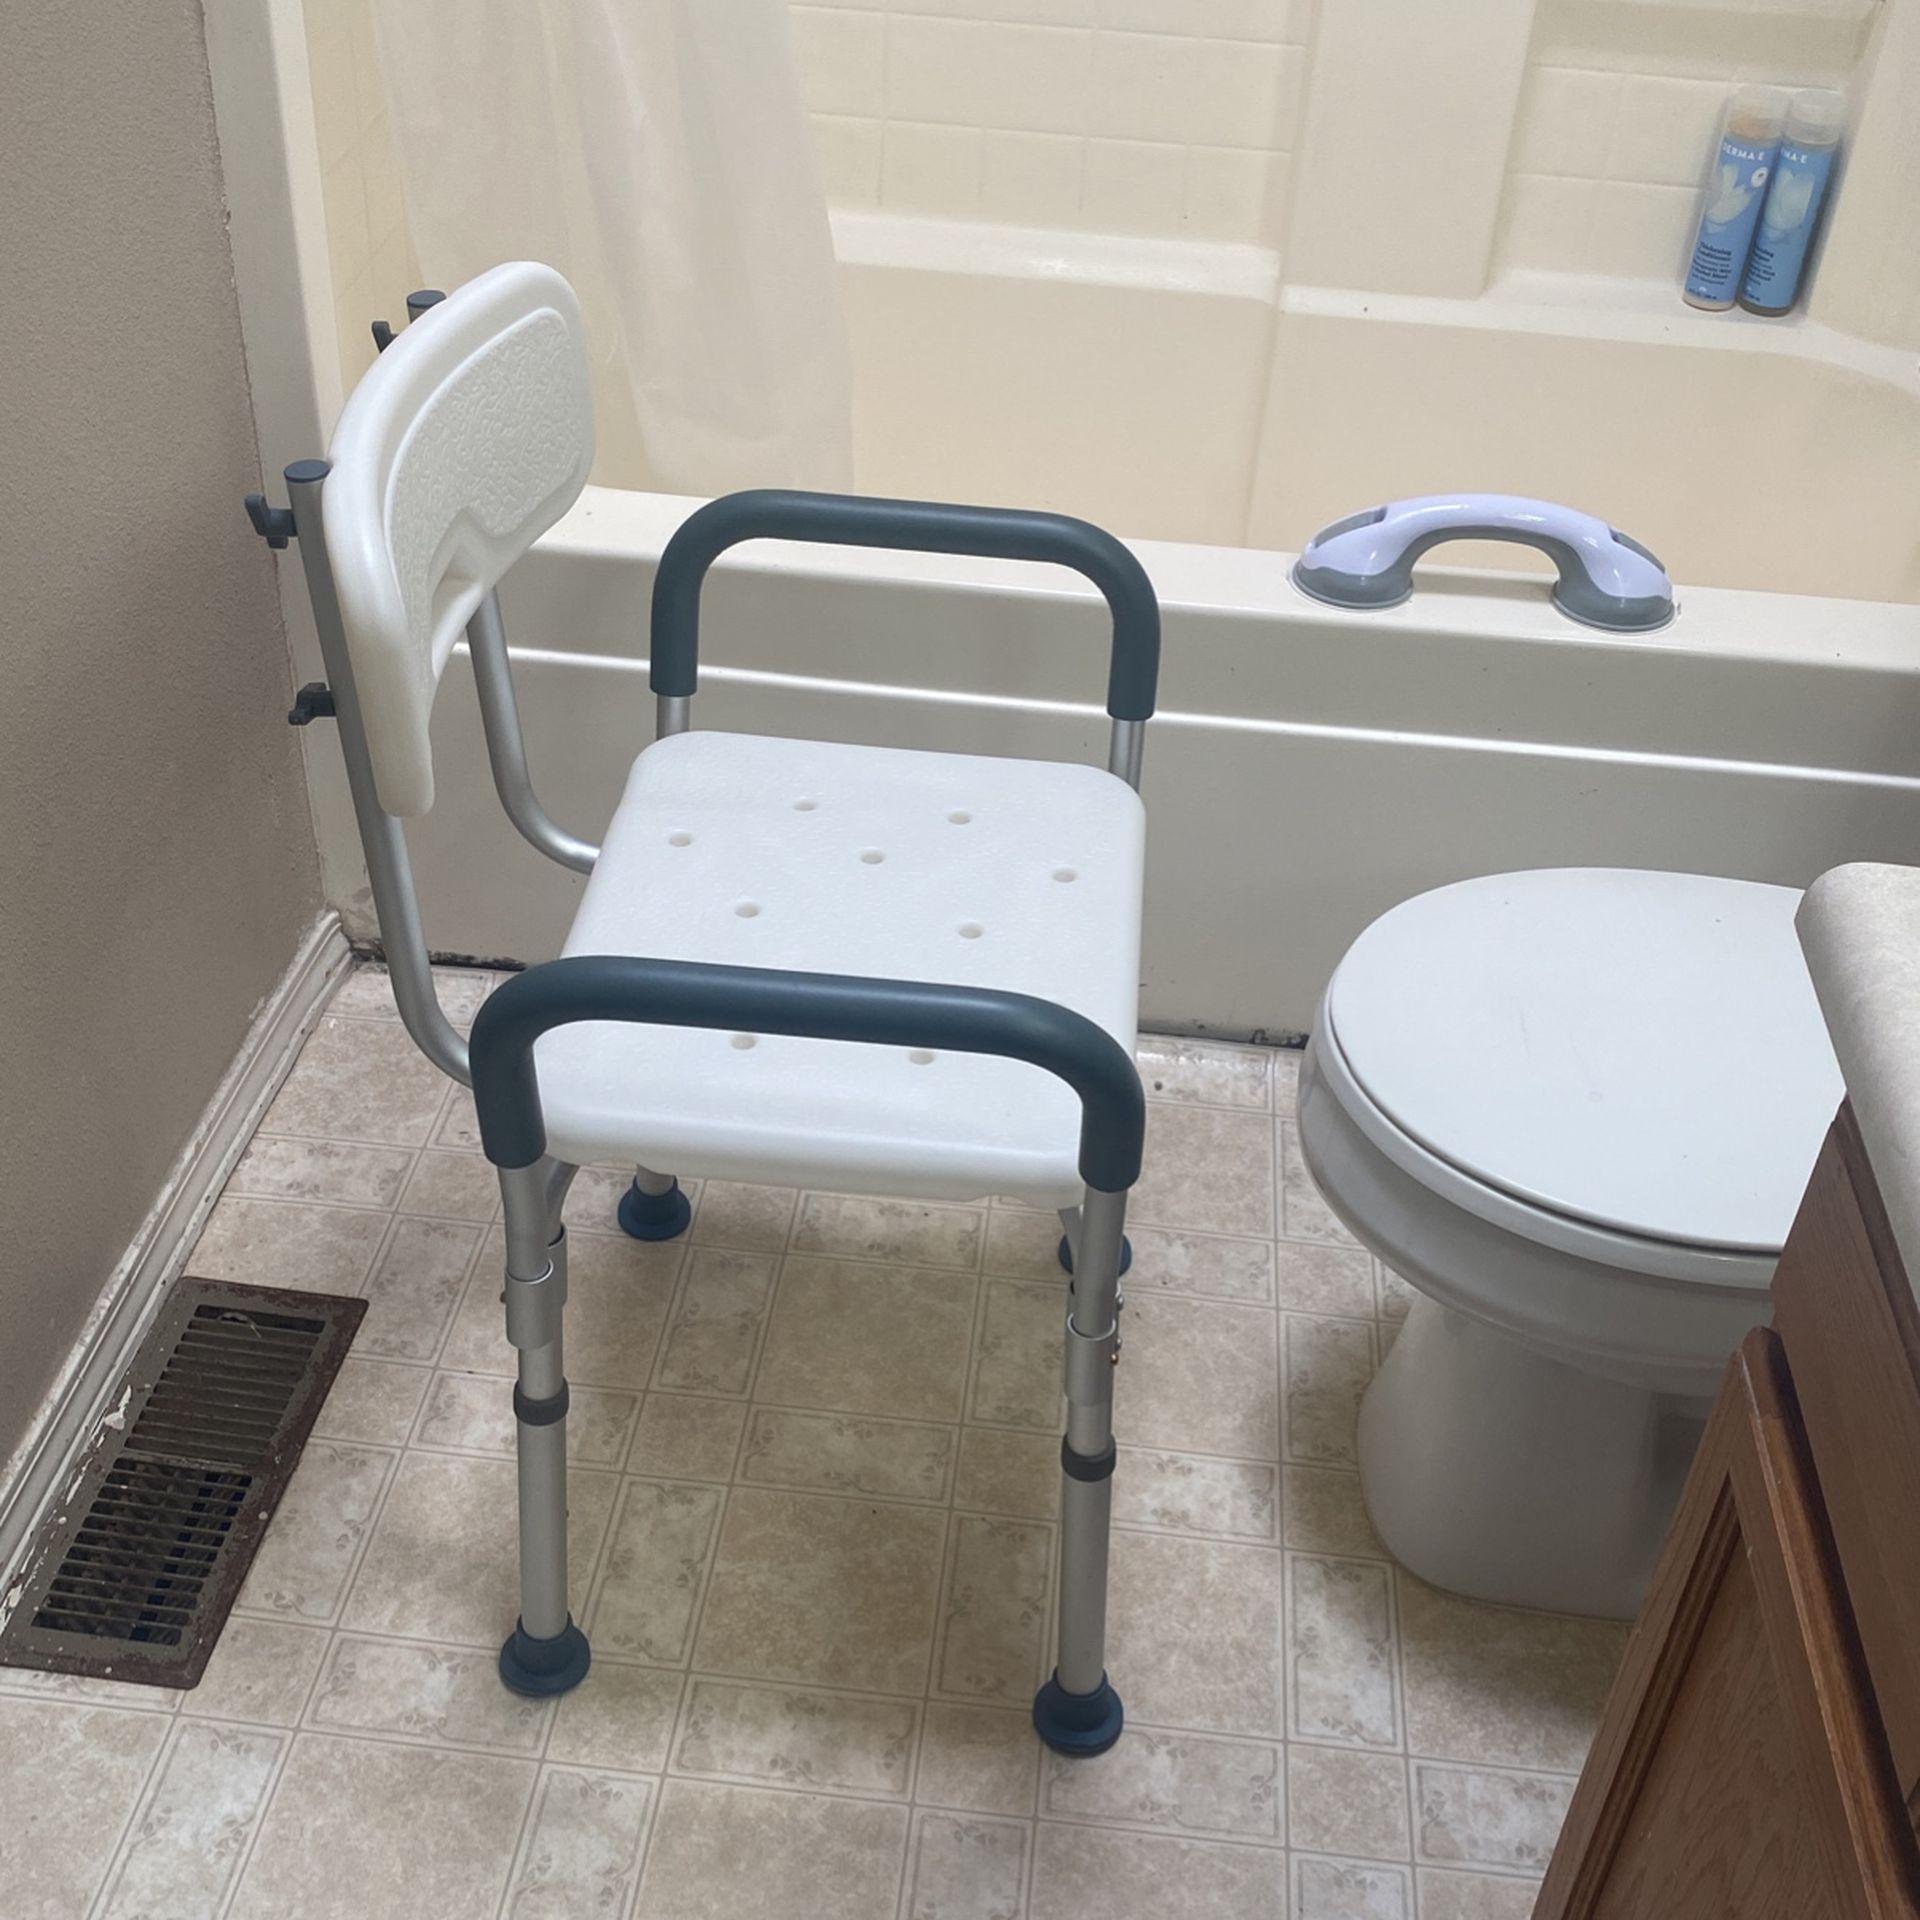 Shower Chair, And Bath Handles